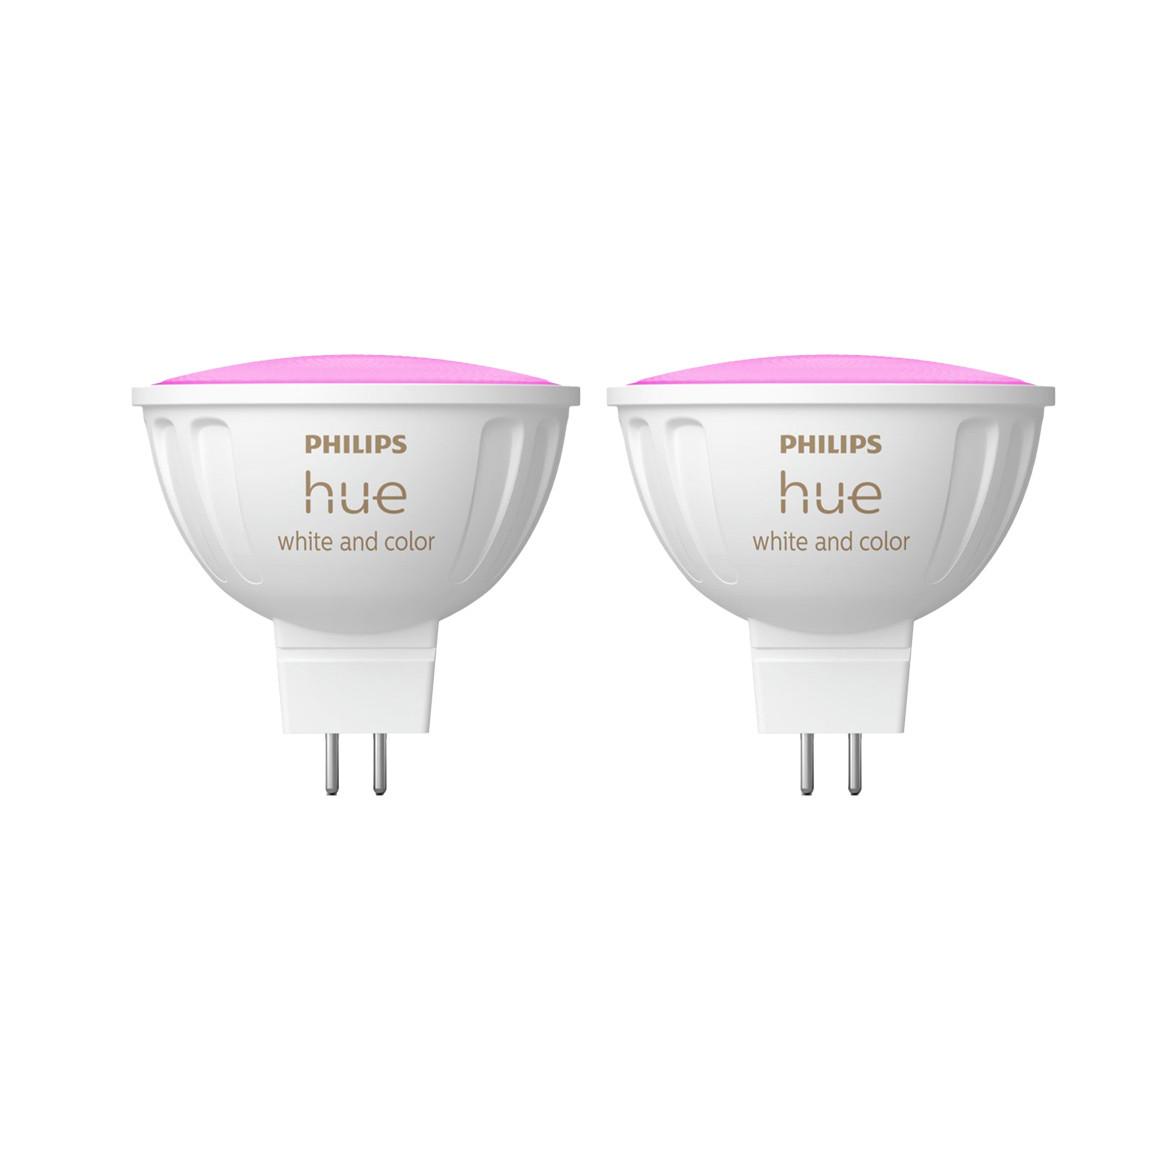 Philips Hue White & Col. Amb. MR16 LED Lampe Doppelpack 2x400lm - Weiß